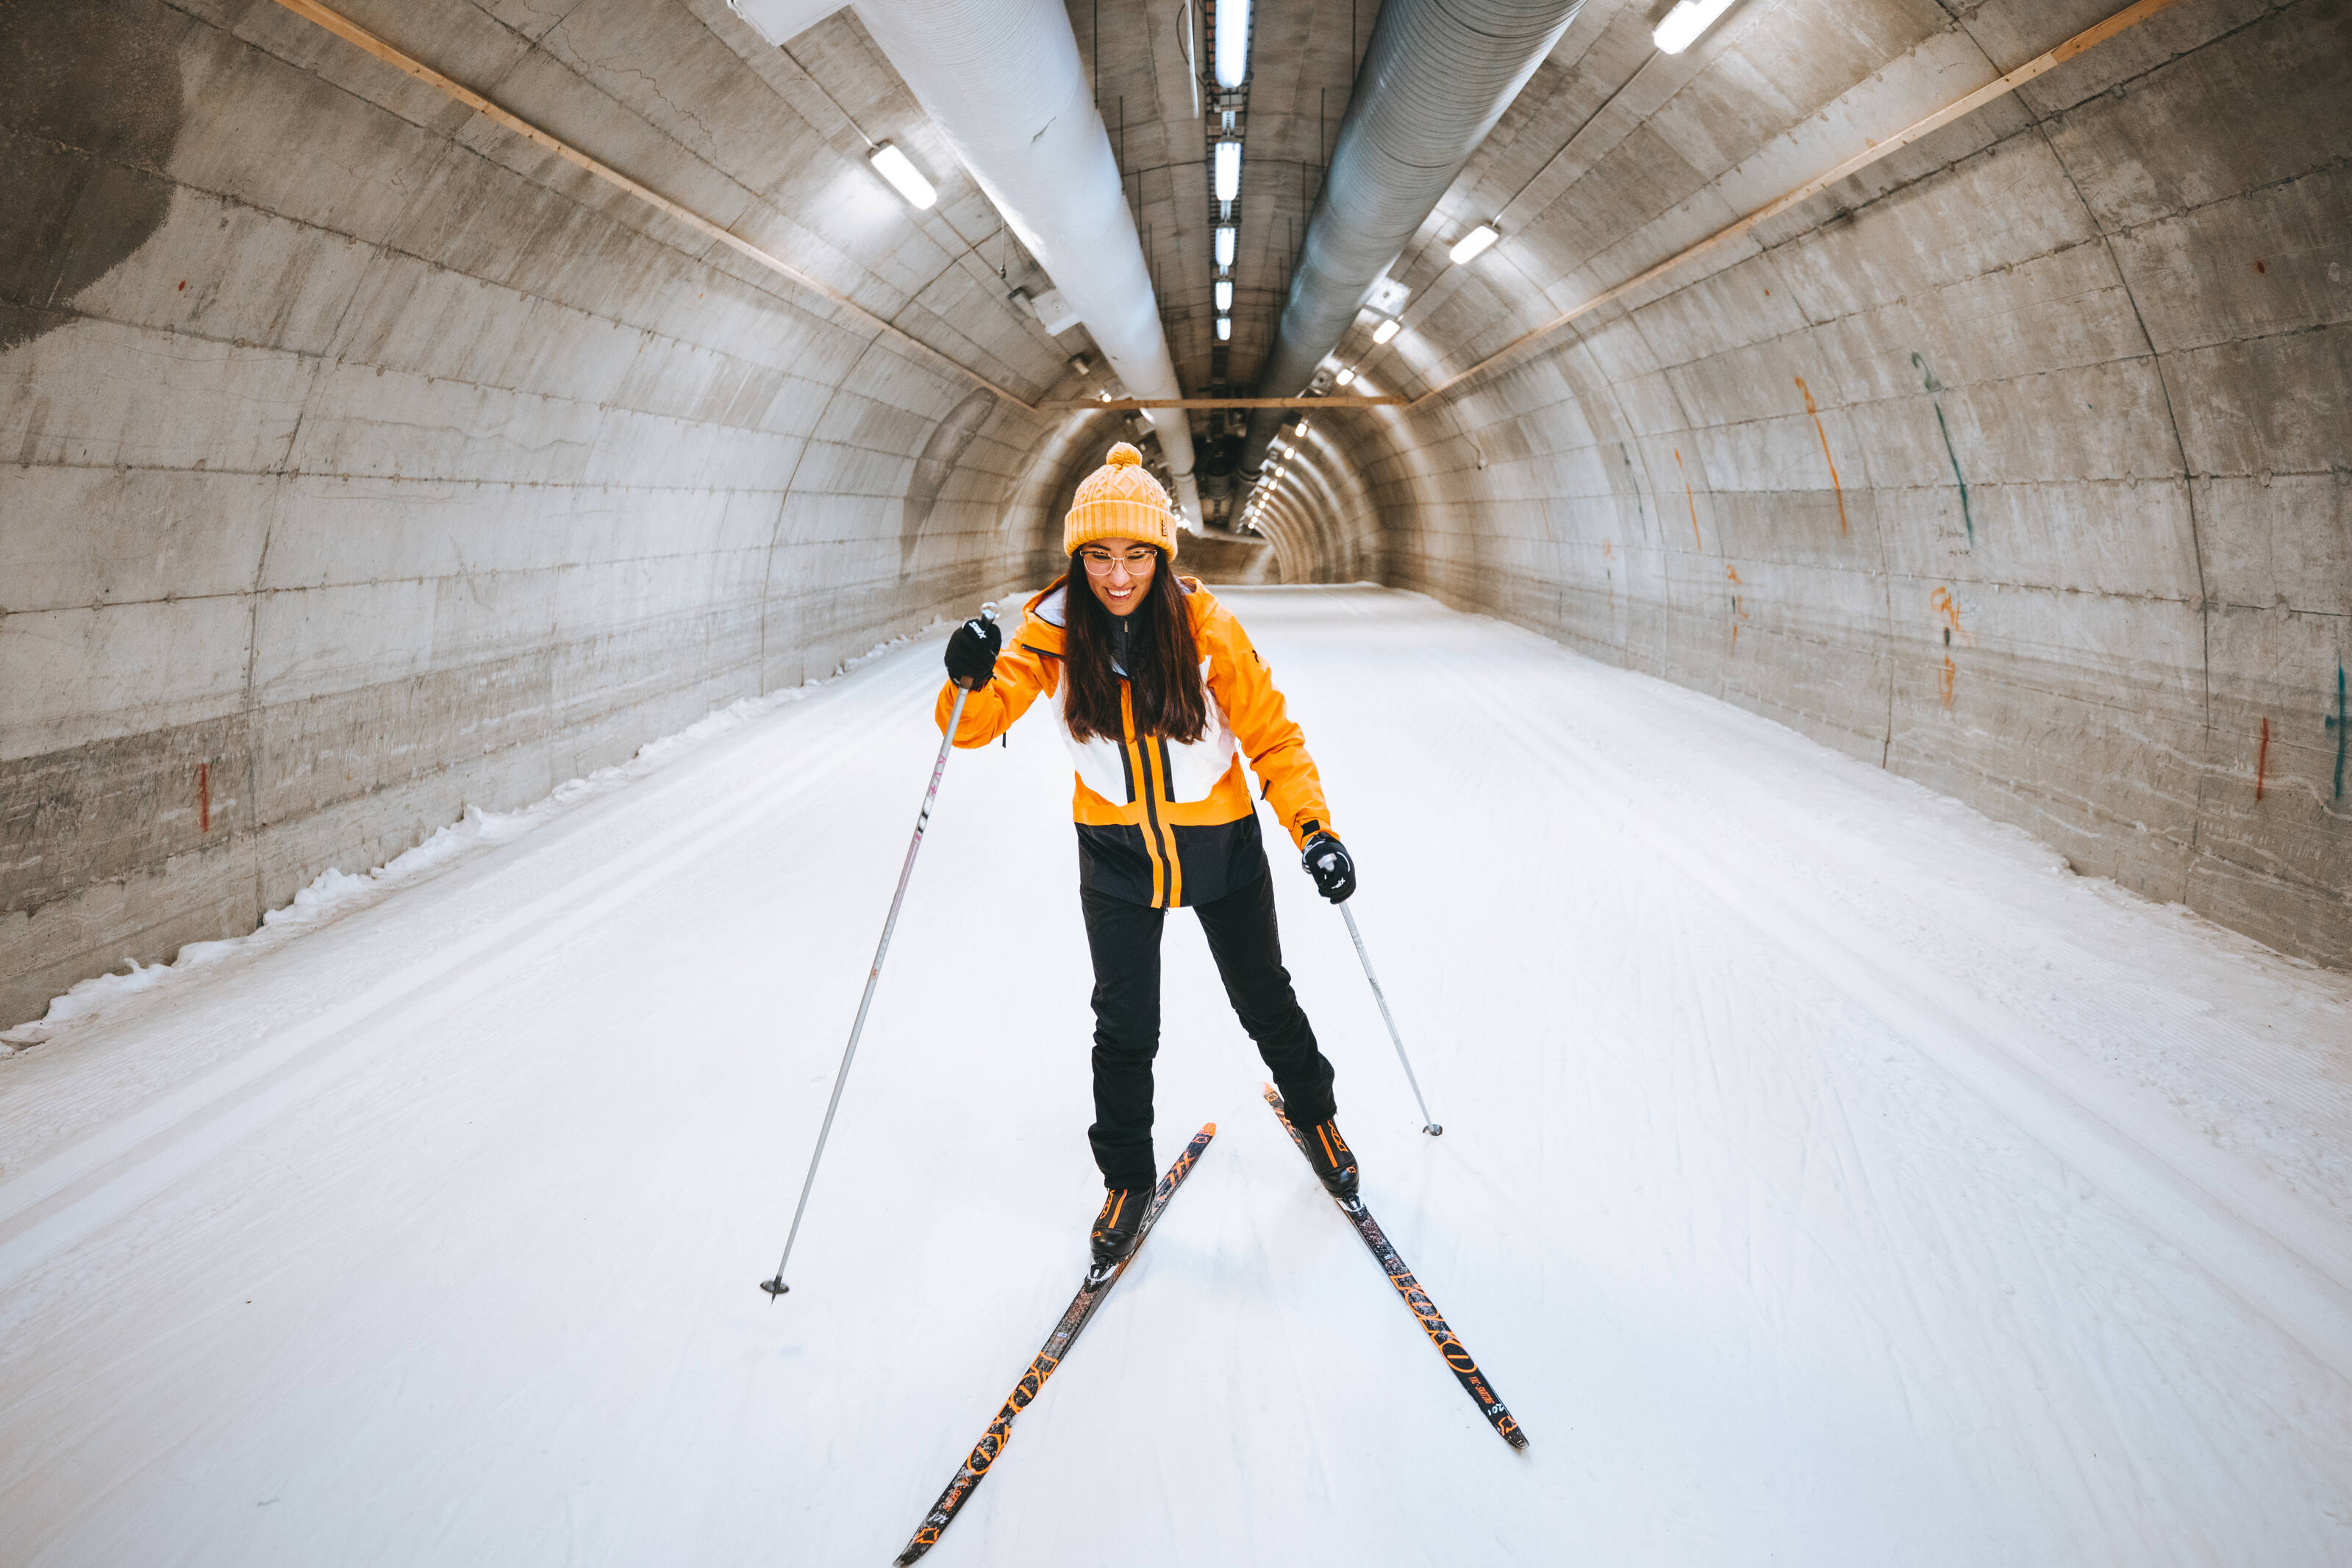 A happy woman in a yellow ski suit skiing in a tunnel.